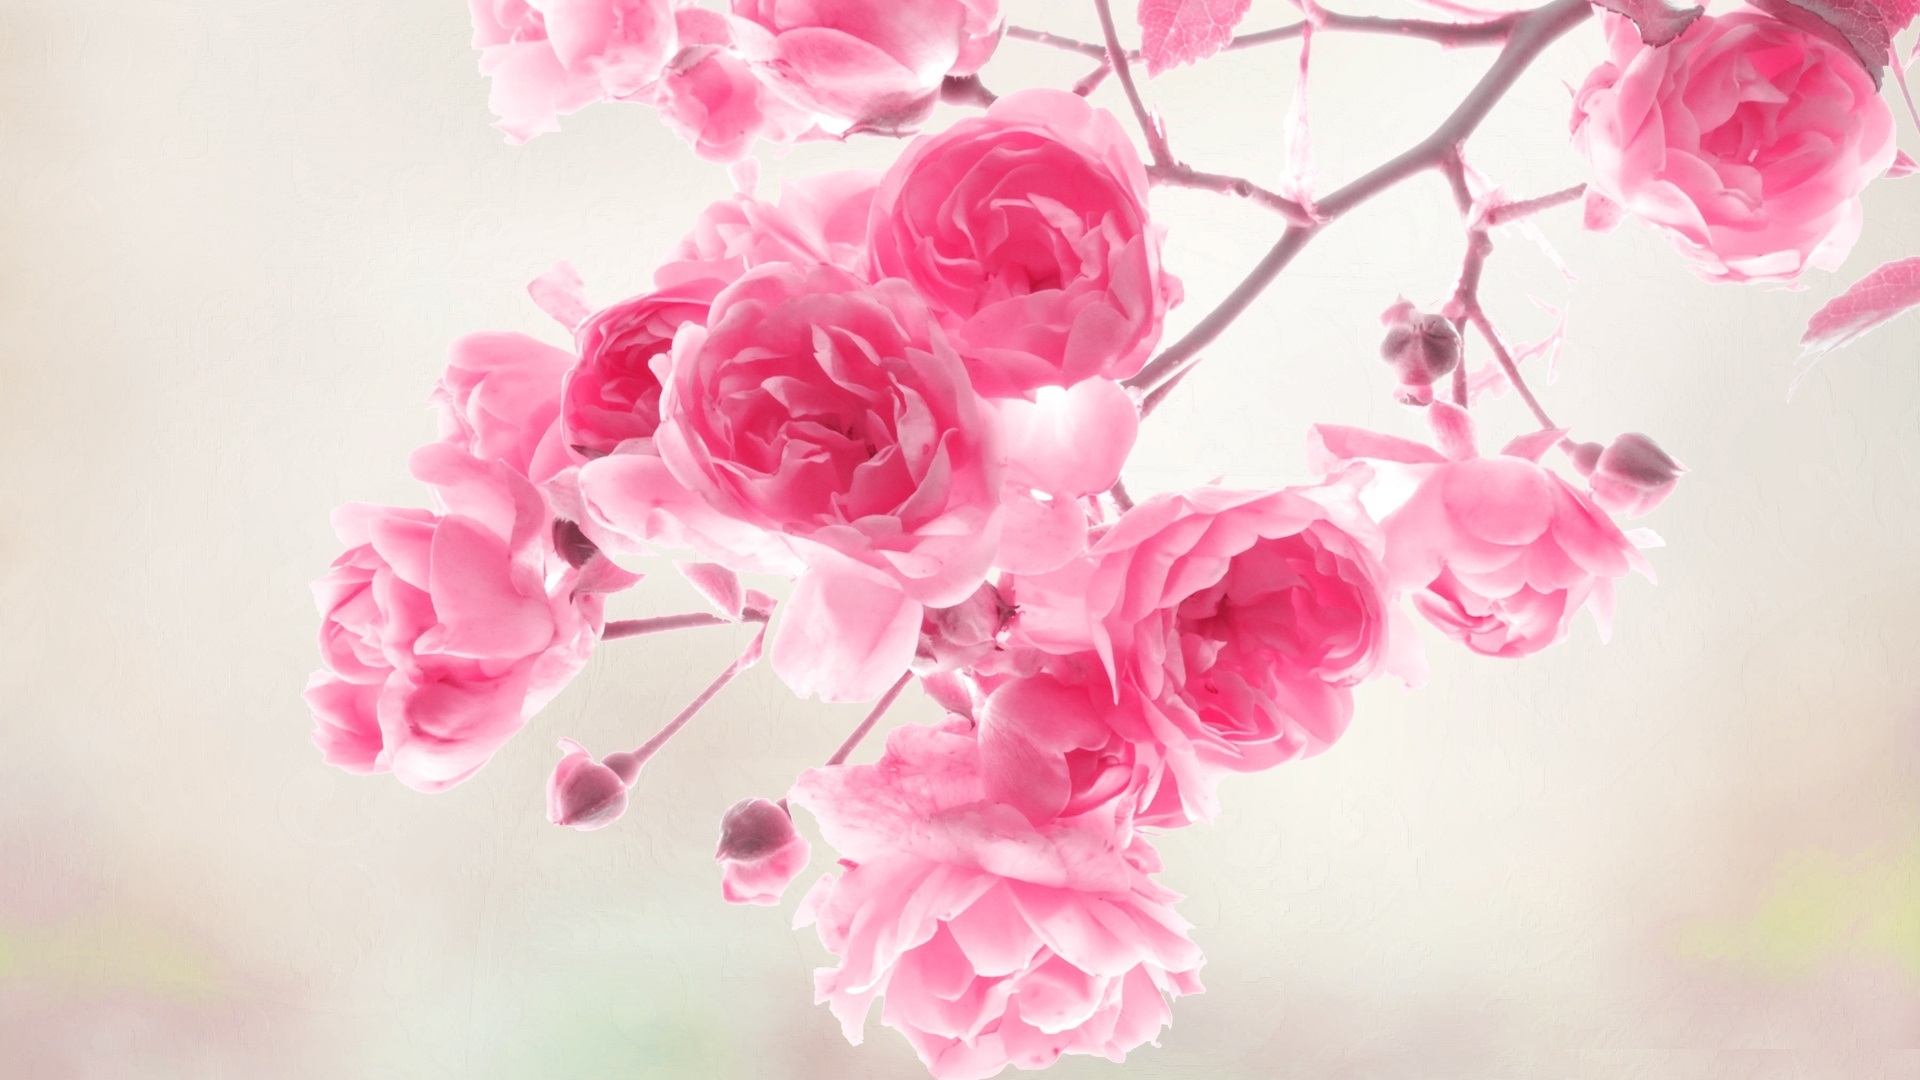 Free best wallpaper images flowers background